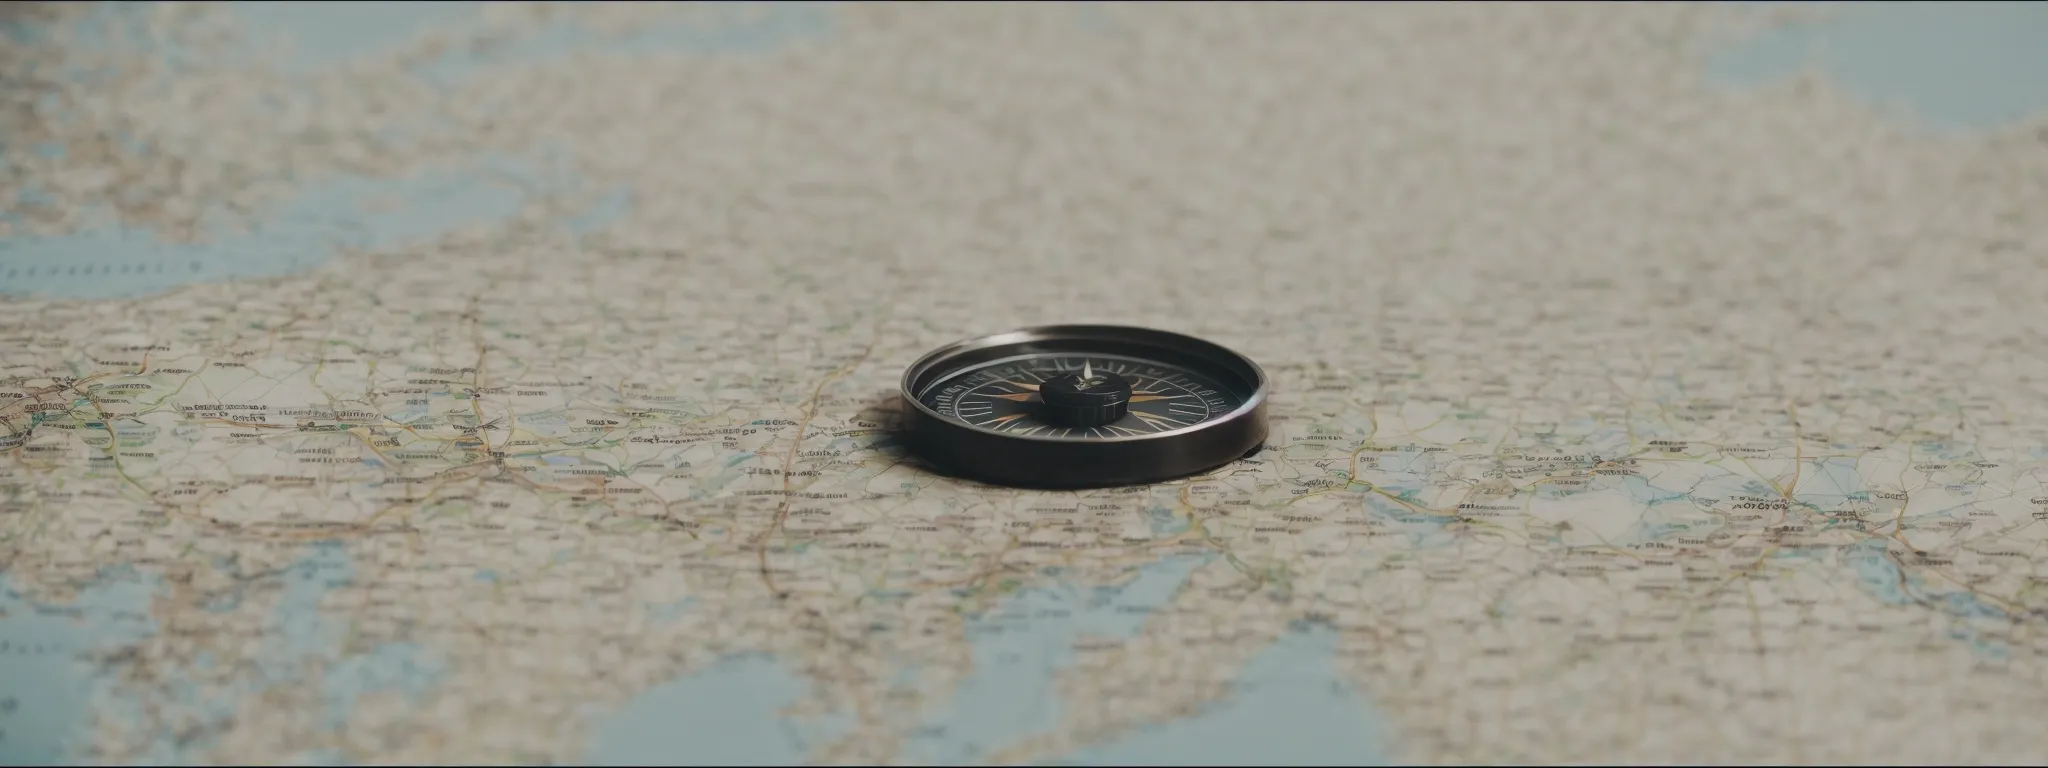 a compass on a navigational map surrounded by web development code and seo analytics charts.